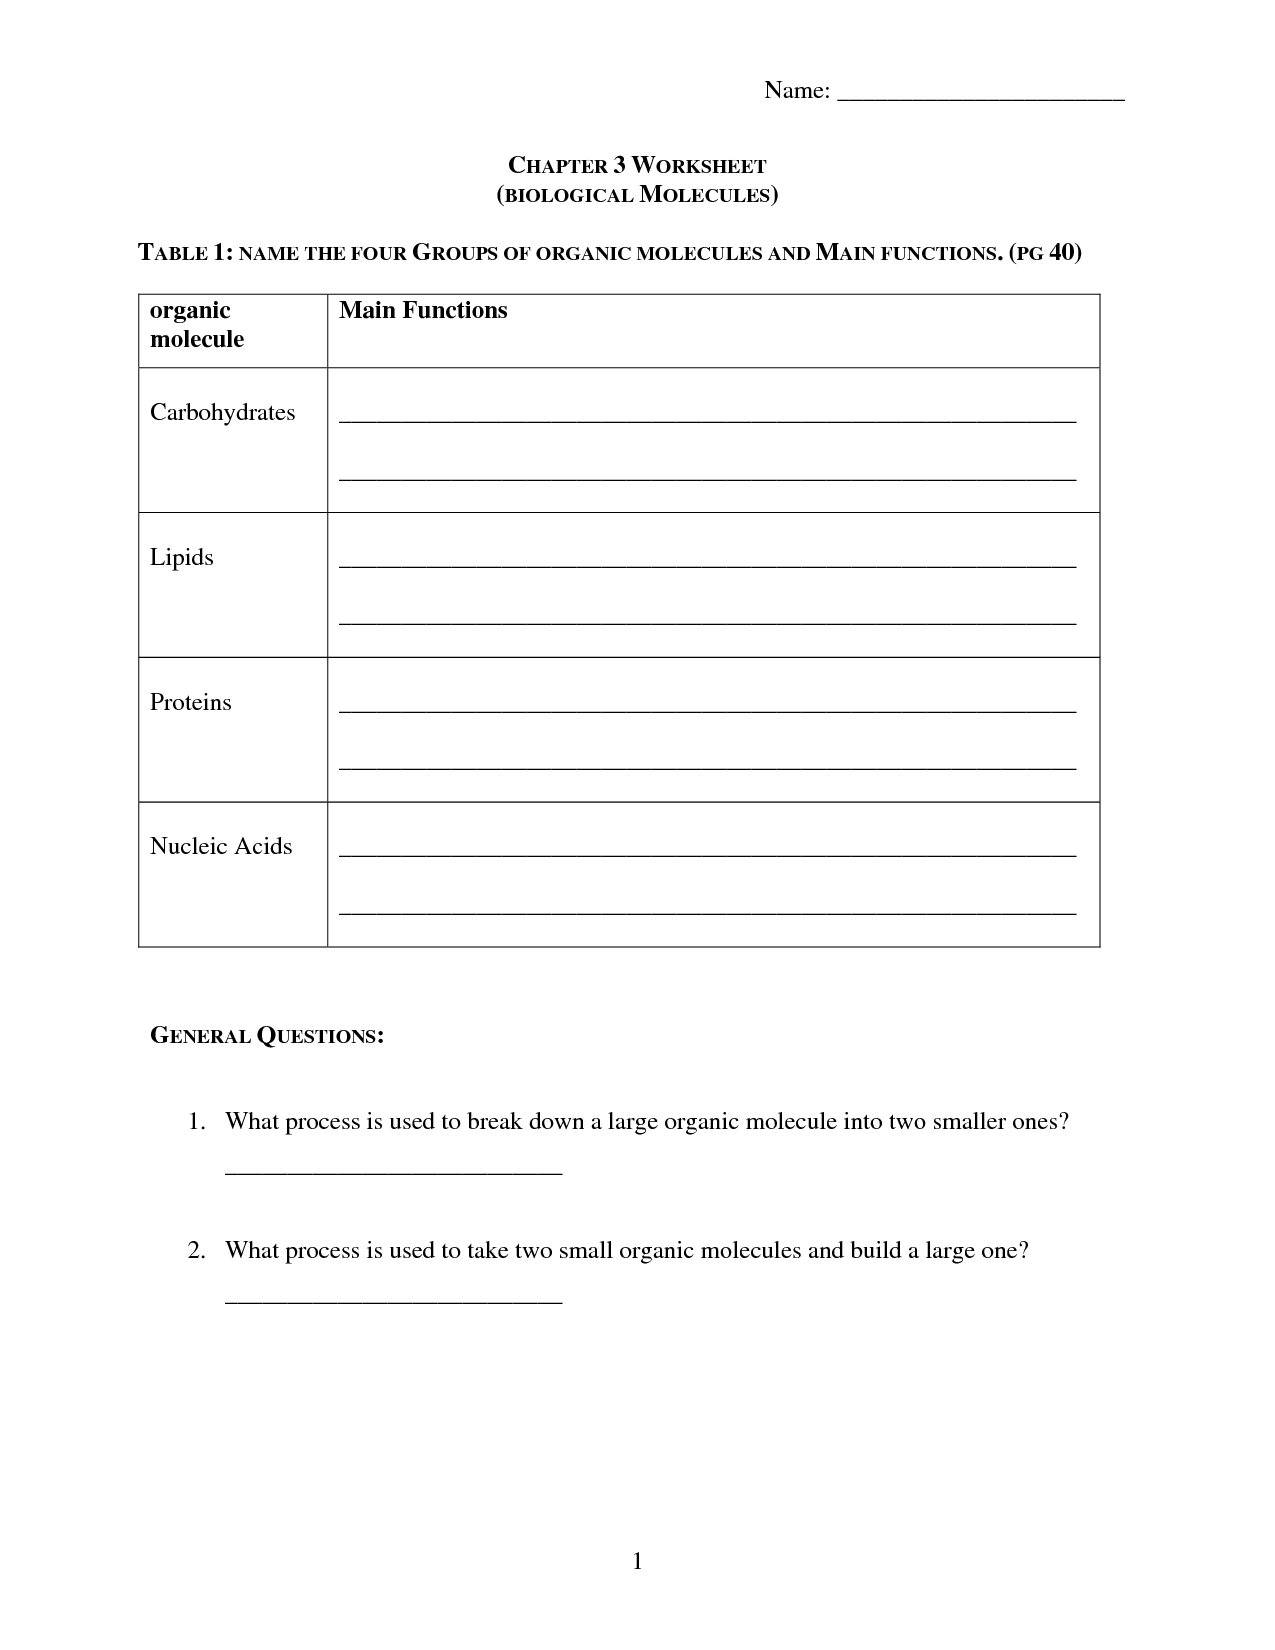 14 Best Images of Carbohydrates Lipids And Proteins Worksheet  Organic Molecules Worksheet 